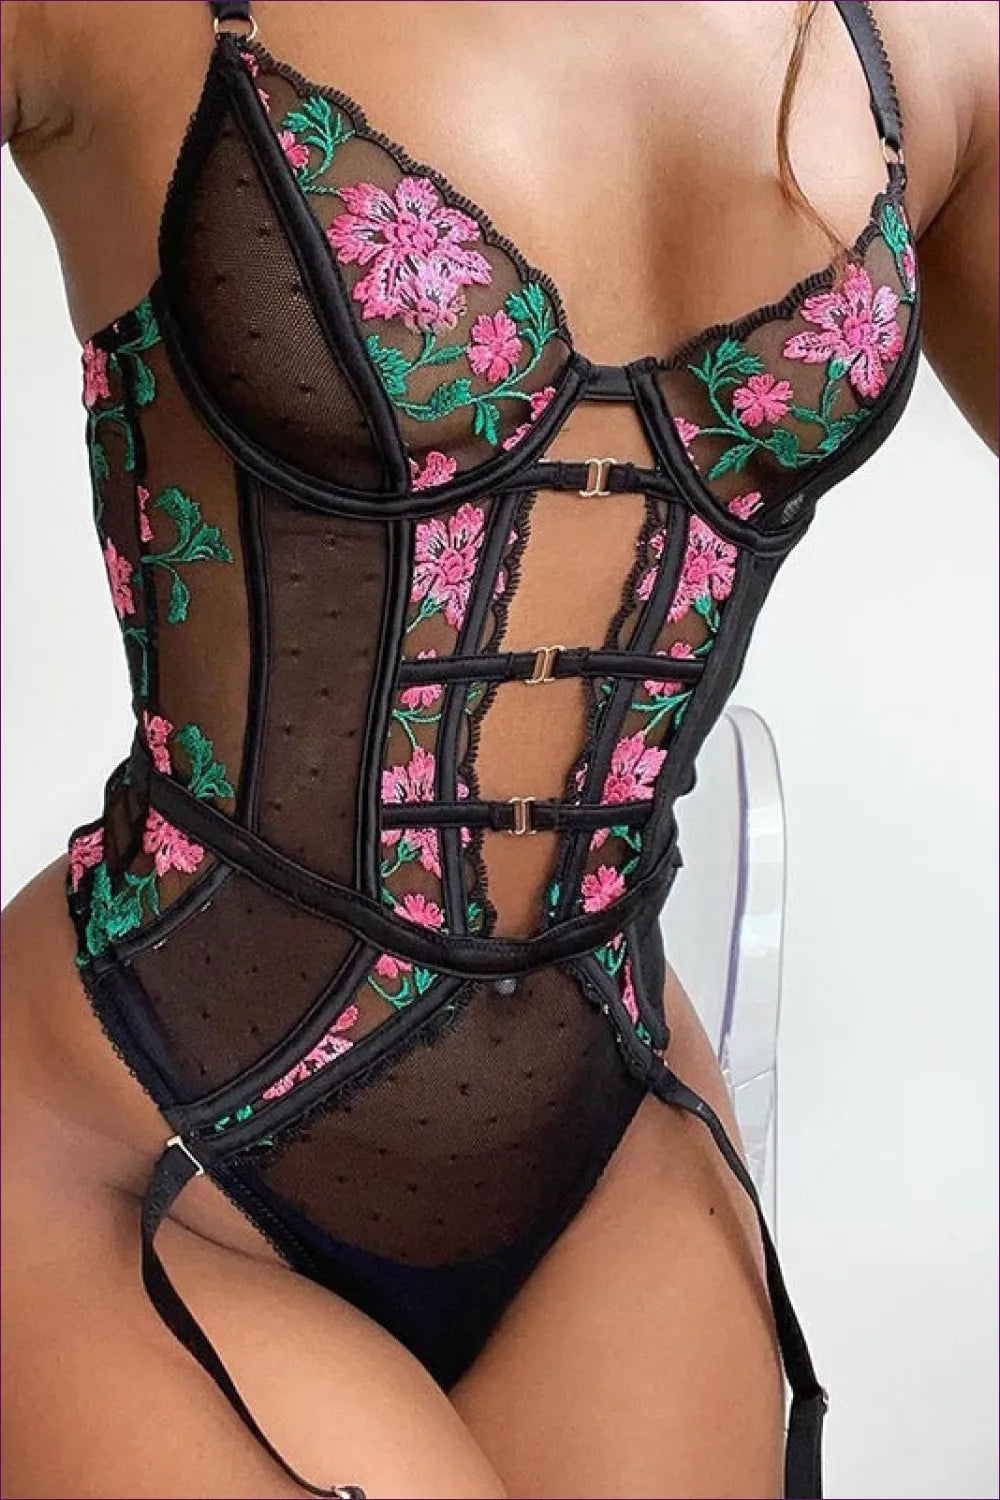 Show Off Your Curves And Style With Our Embroidery Lace Cut Out Sheer Bodysuit. Sheen, Intricate Embroidery,